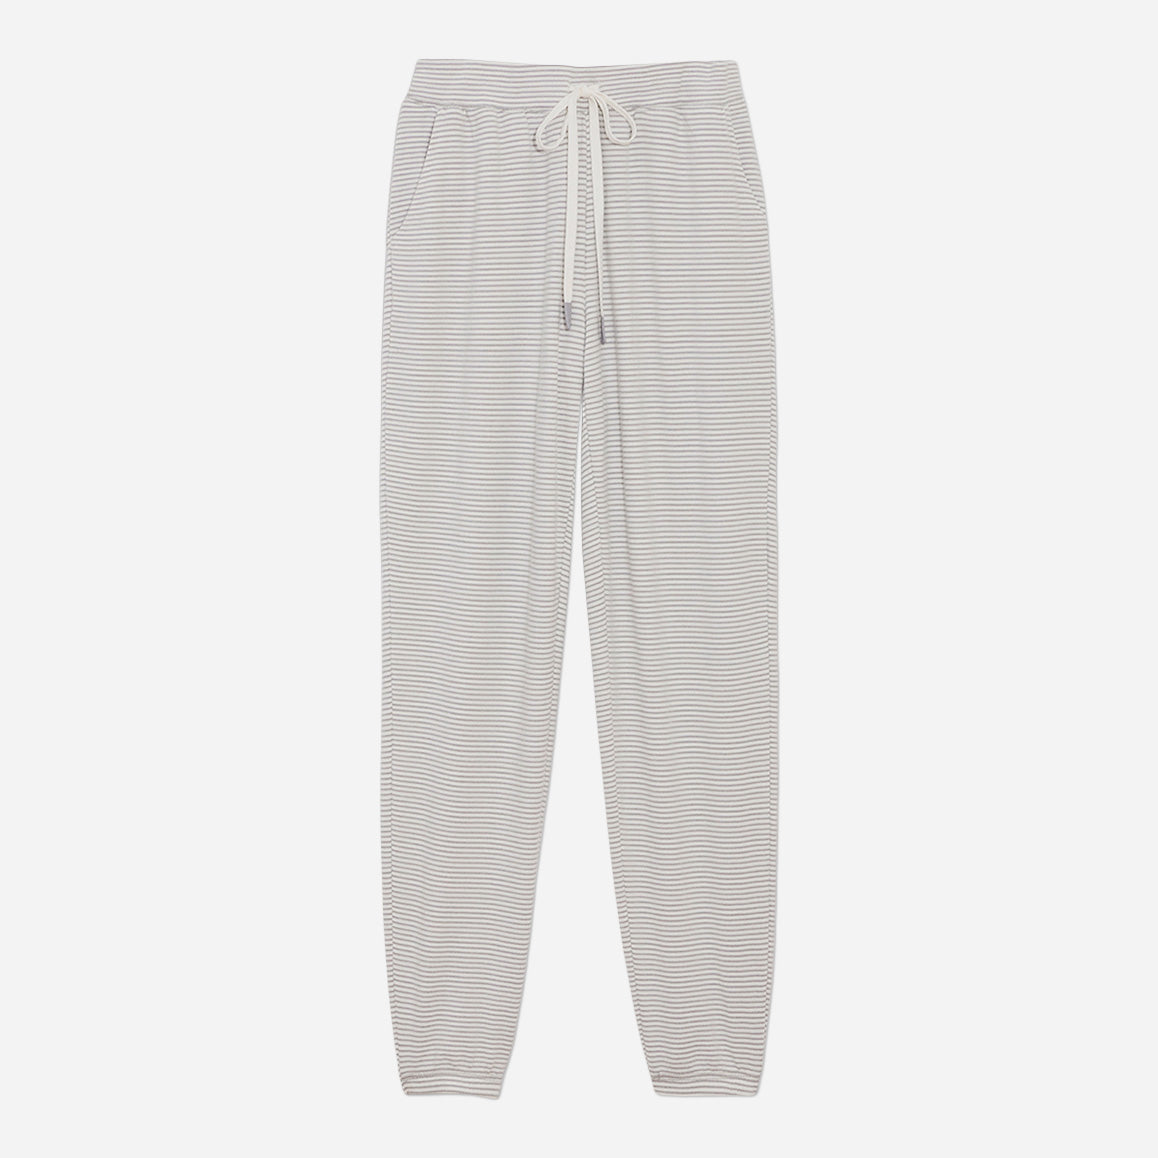 These cozy jogger pants feature a relaxed fit and an elastic waistband with an adjustable drawstring to provide a customized and secure fit. Detailed with a classic yarn-dyed stripe, these stylish lounge pants are a wind-down must have.